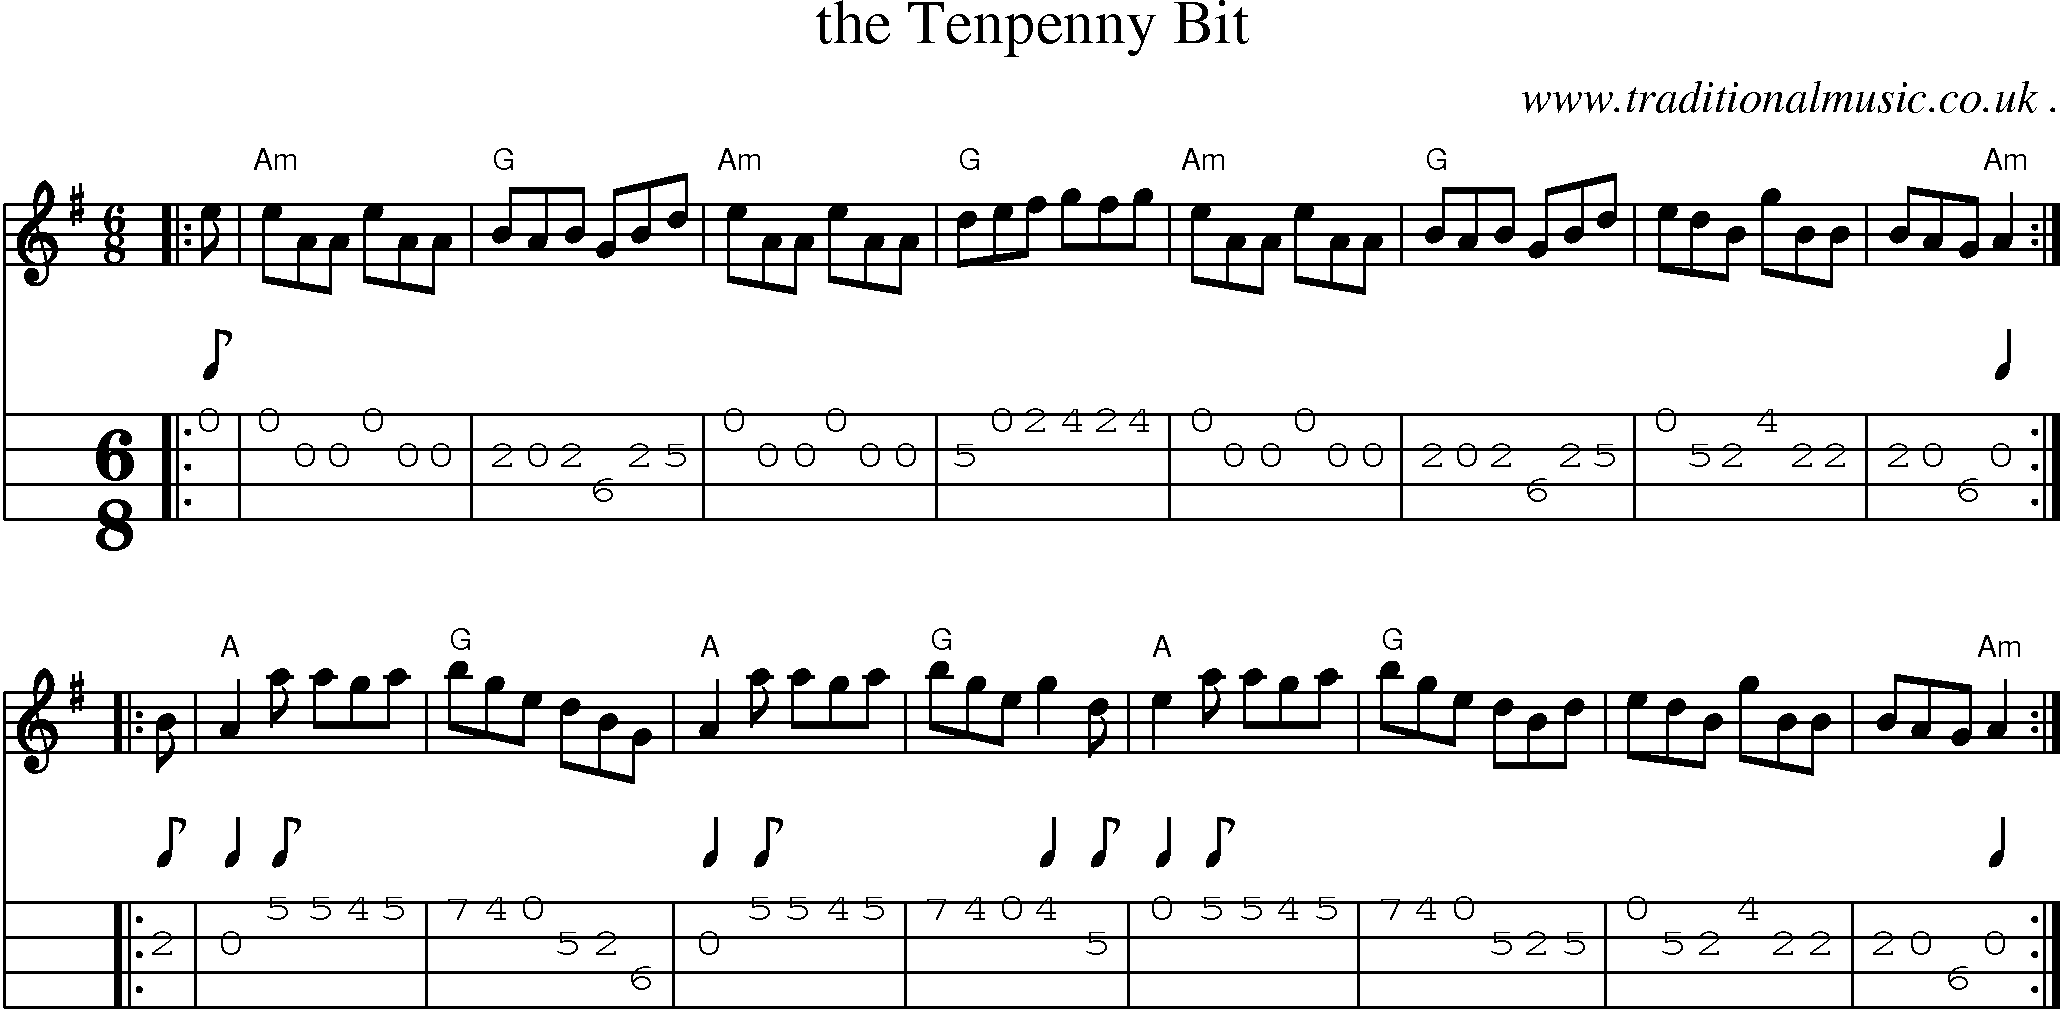 Sheet-music  score, Chords and Mandolin Tabs for The Tenpenny Bit